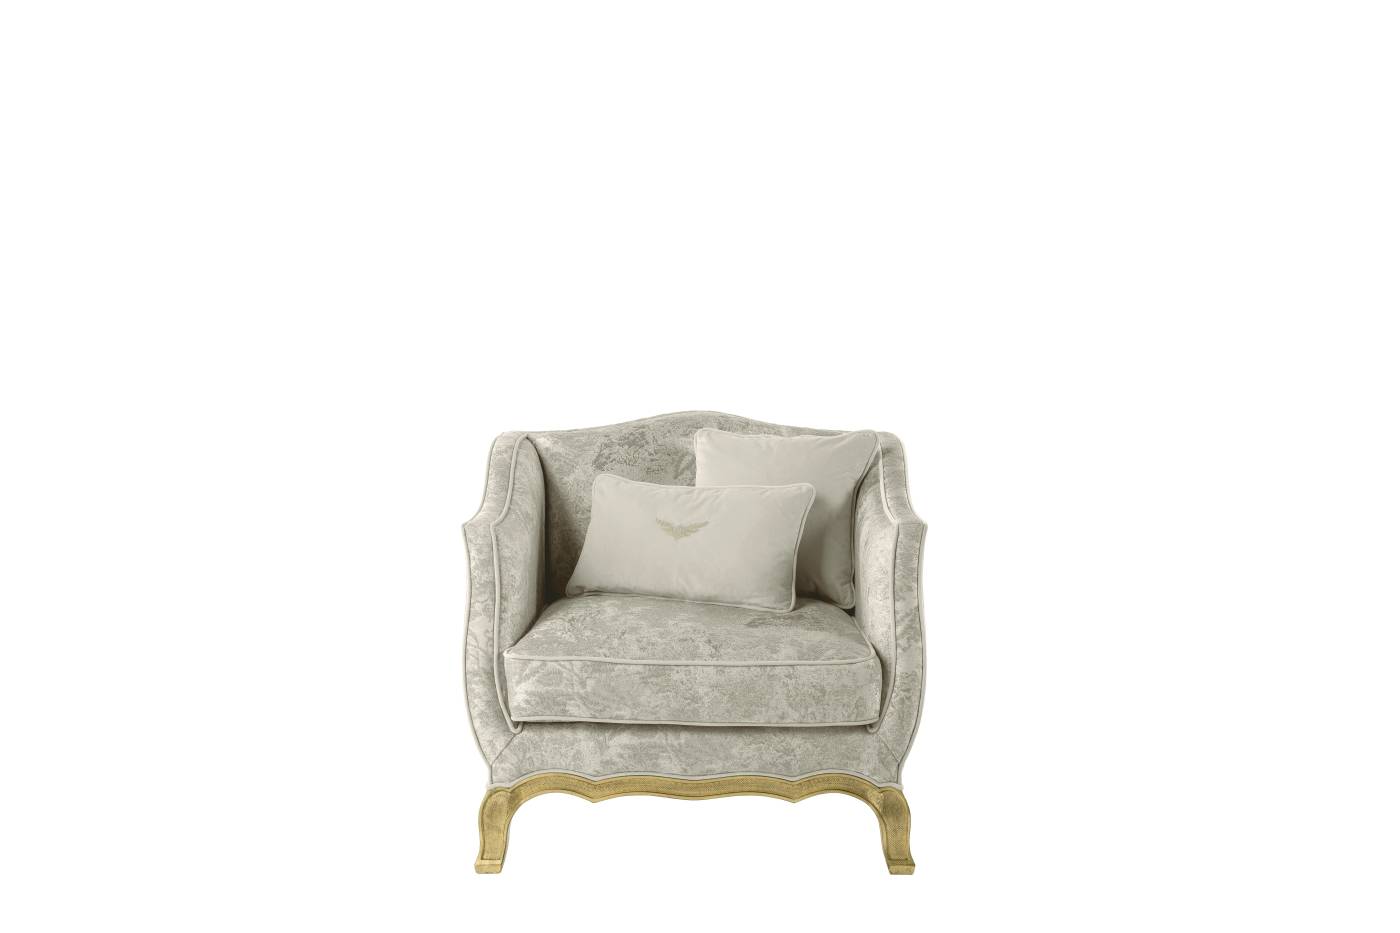 GRANDCAMÉE armchair - convey elegance to each space with italian classic armchairs of the classic Héritage collection